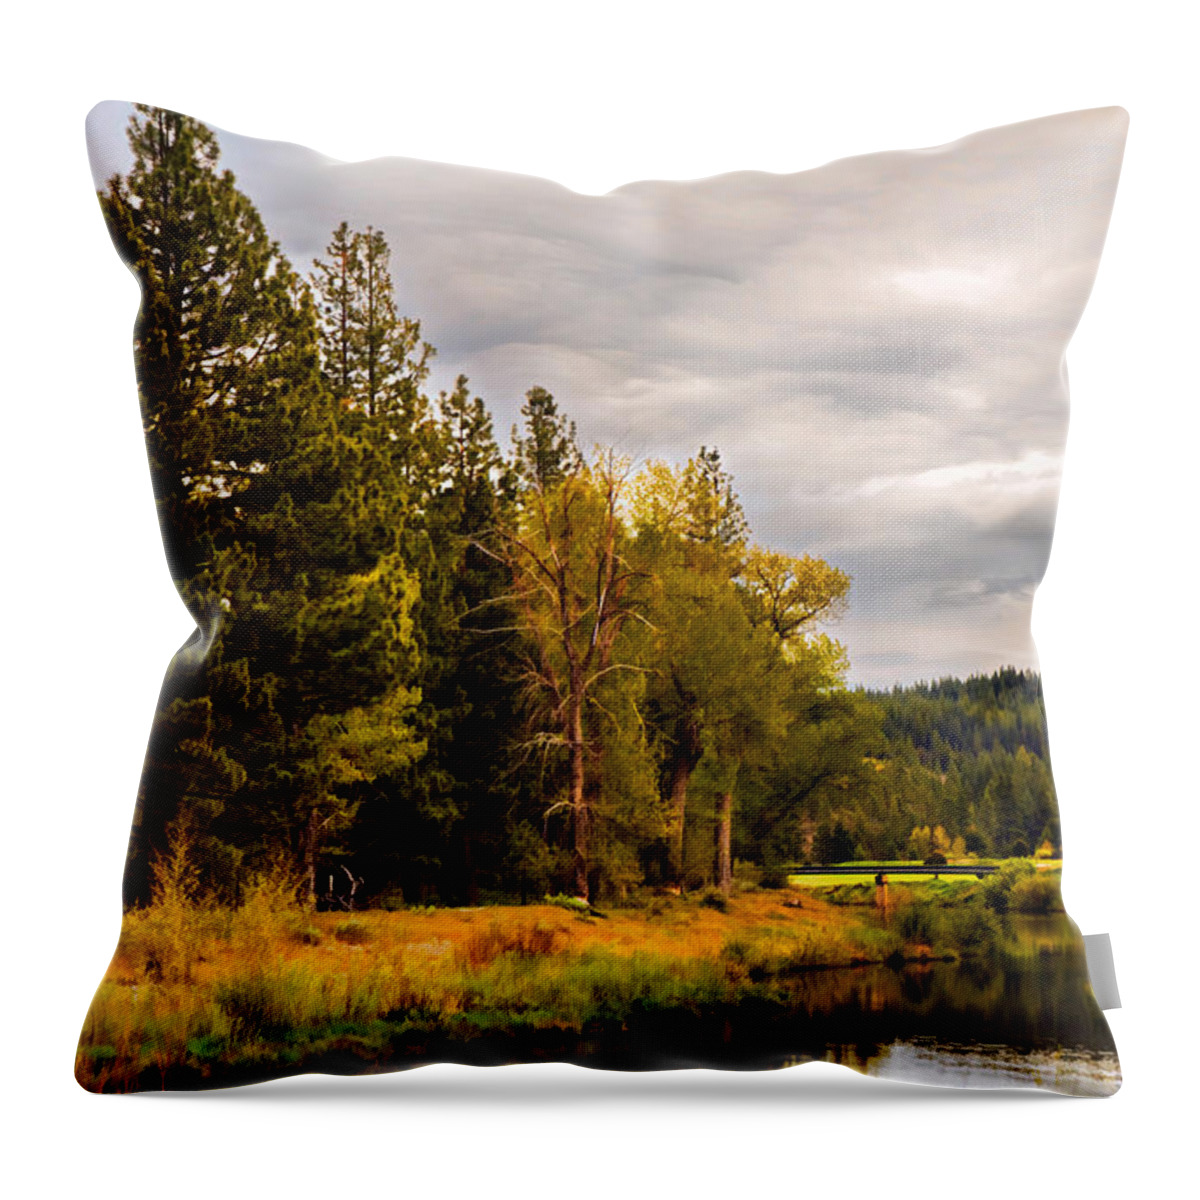 Feather River Throw Pillow featuring the photograph Middle Fork by Mick Burkey